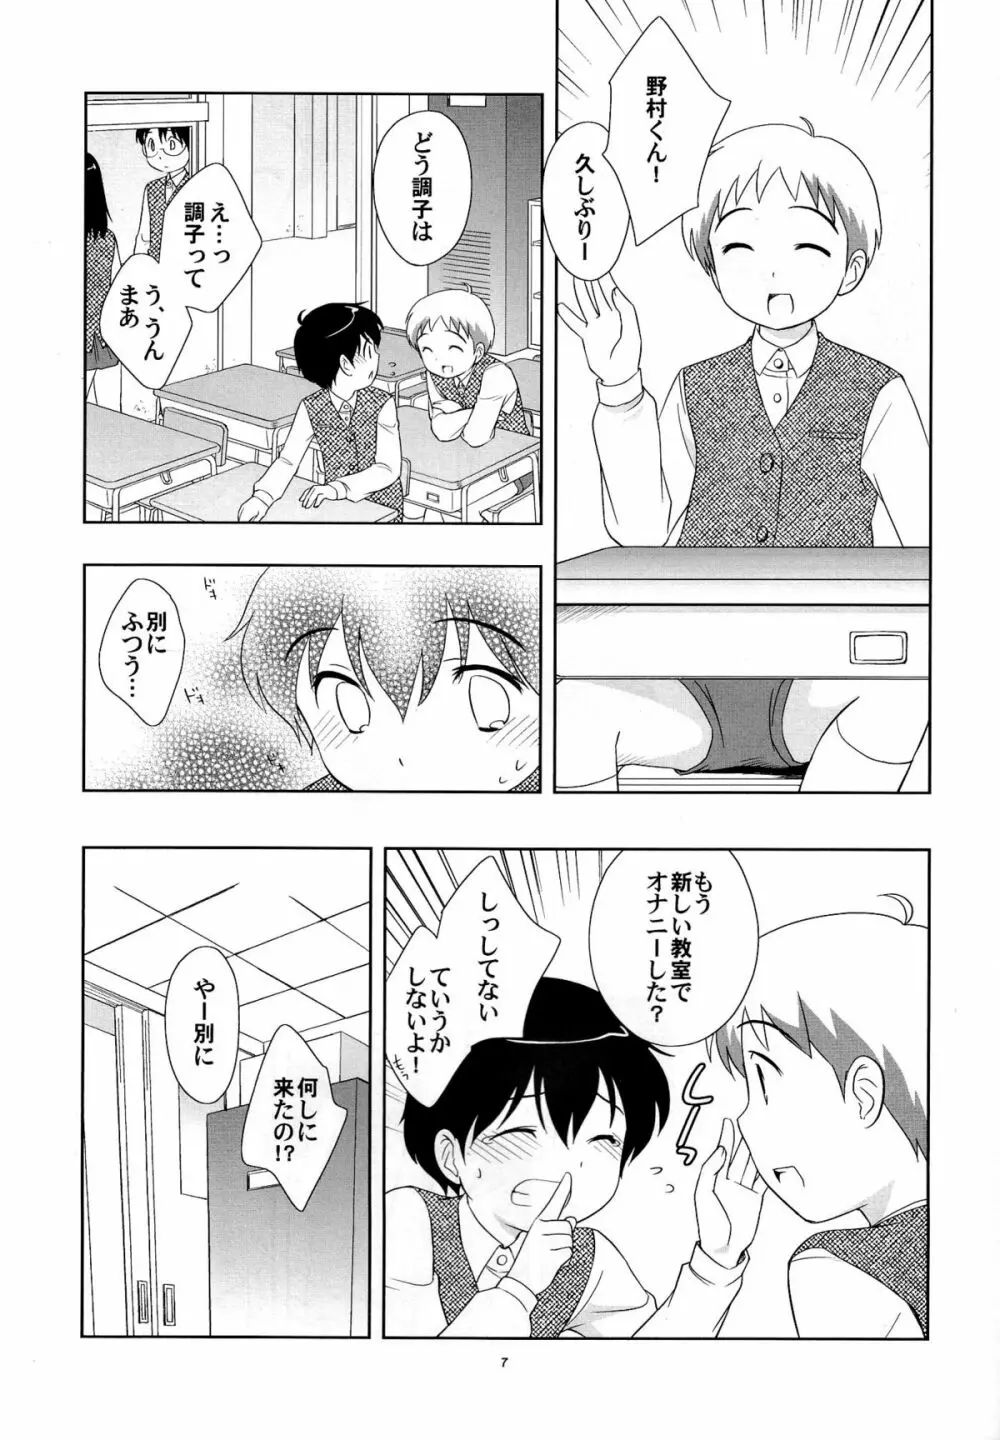 the Slave driver at school Again 2年目もあそぼ! Page.6